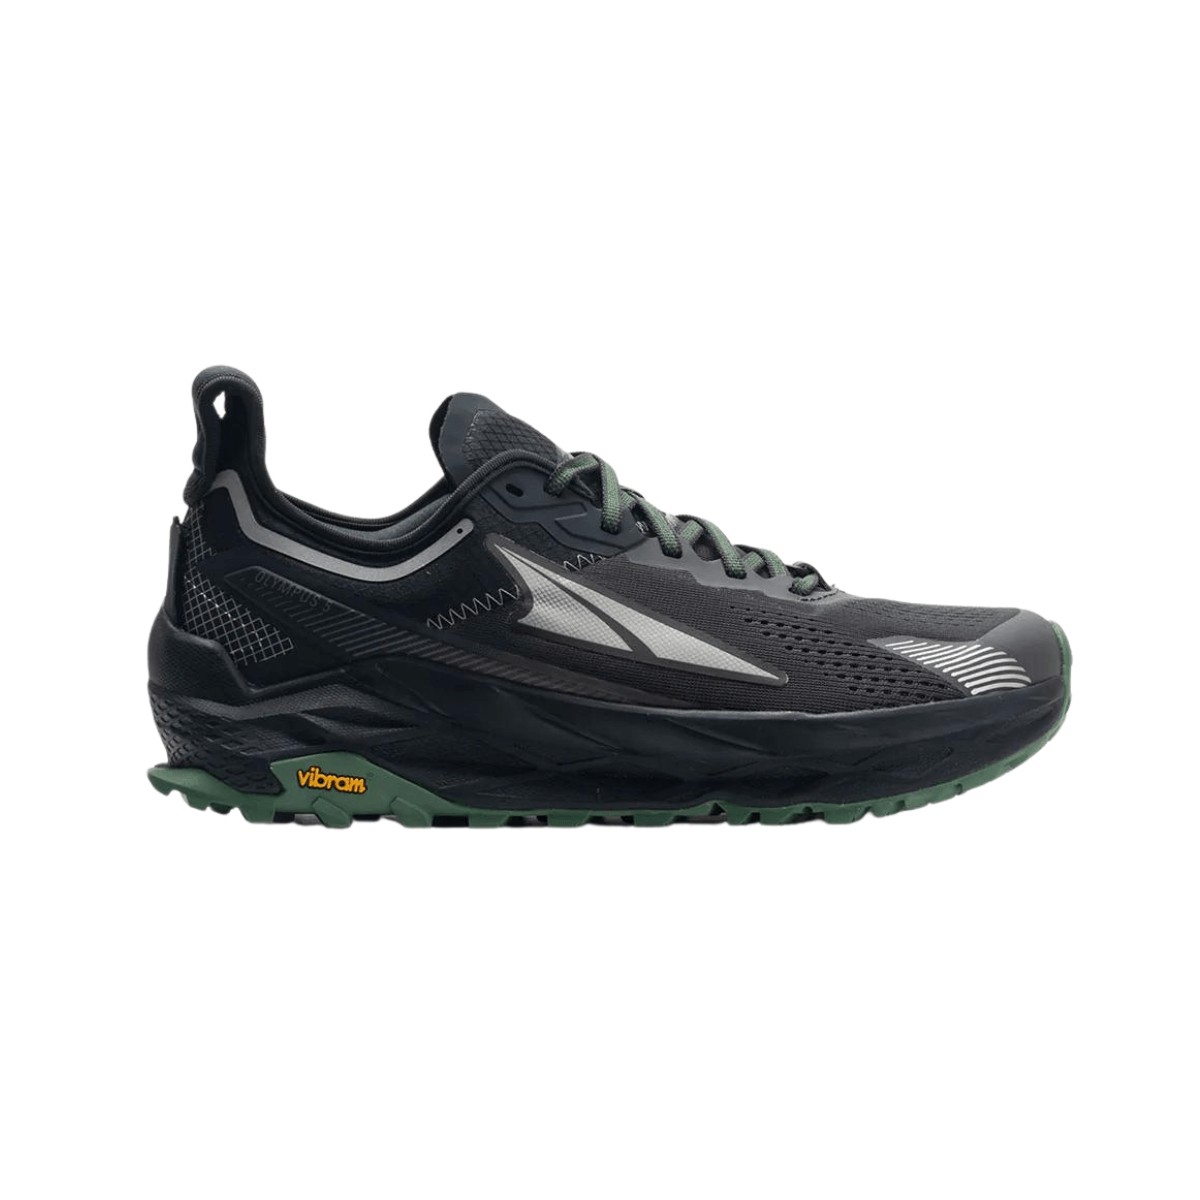 Altra Olympus 5 Shoes Black Gray AW22, Size 42 - EUR